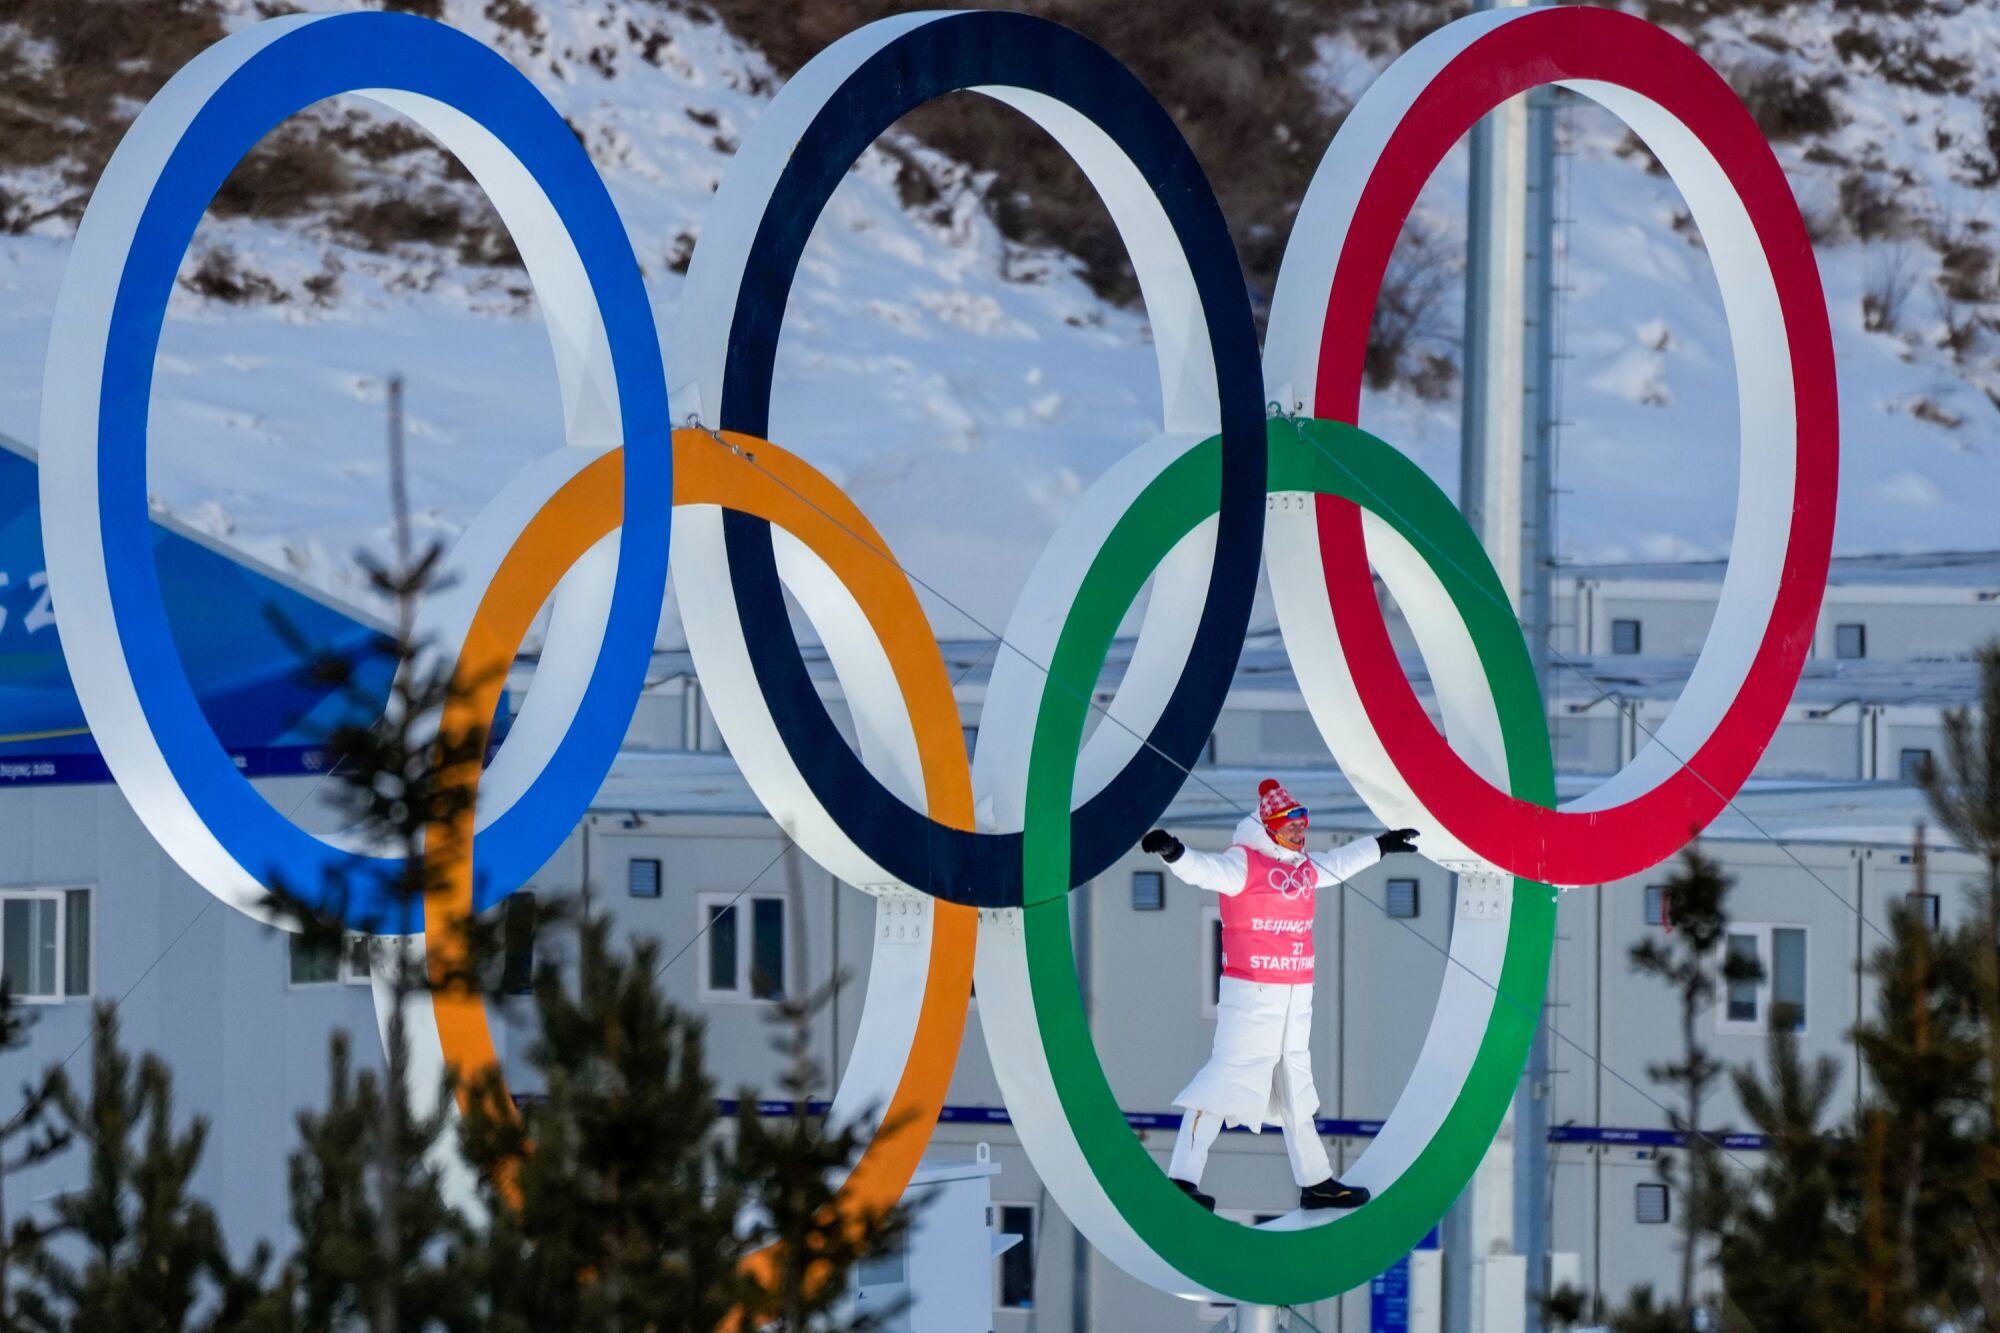 A person stands in the Olympic Rings during a cross-country skiing training session.